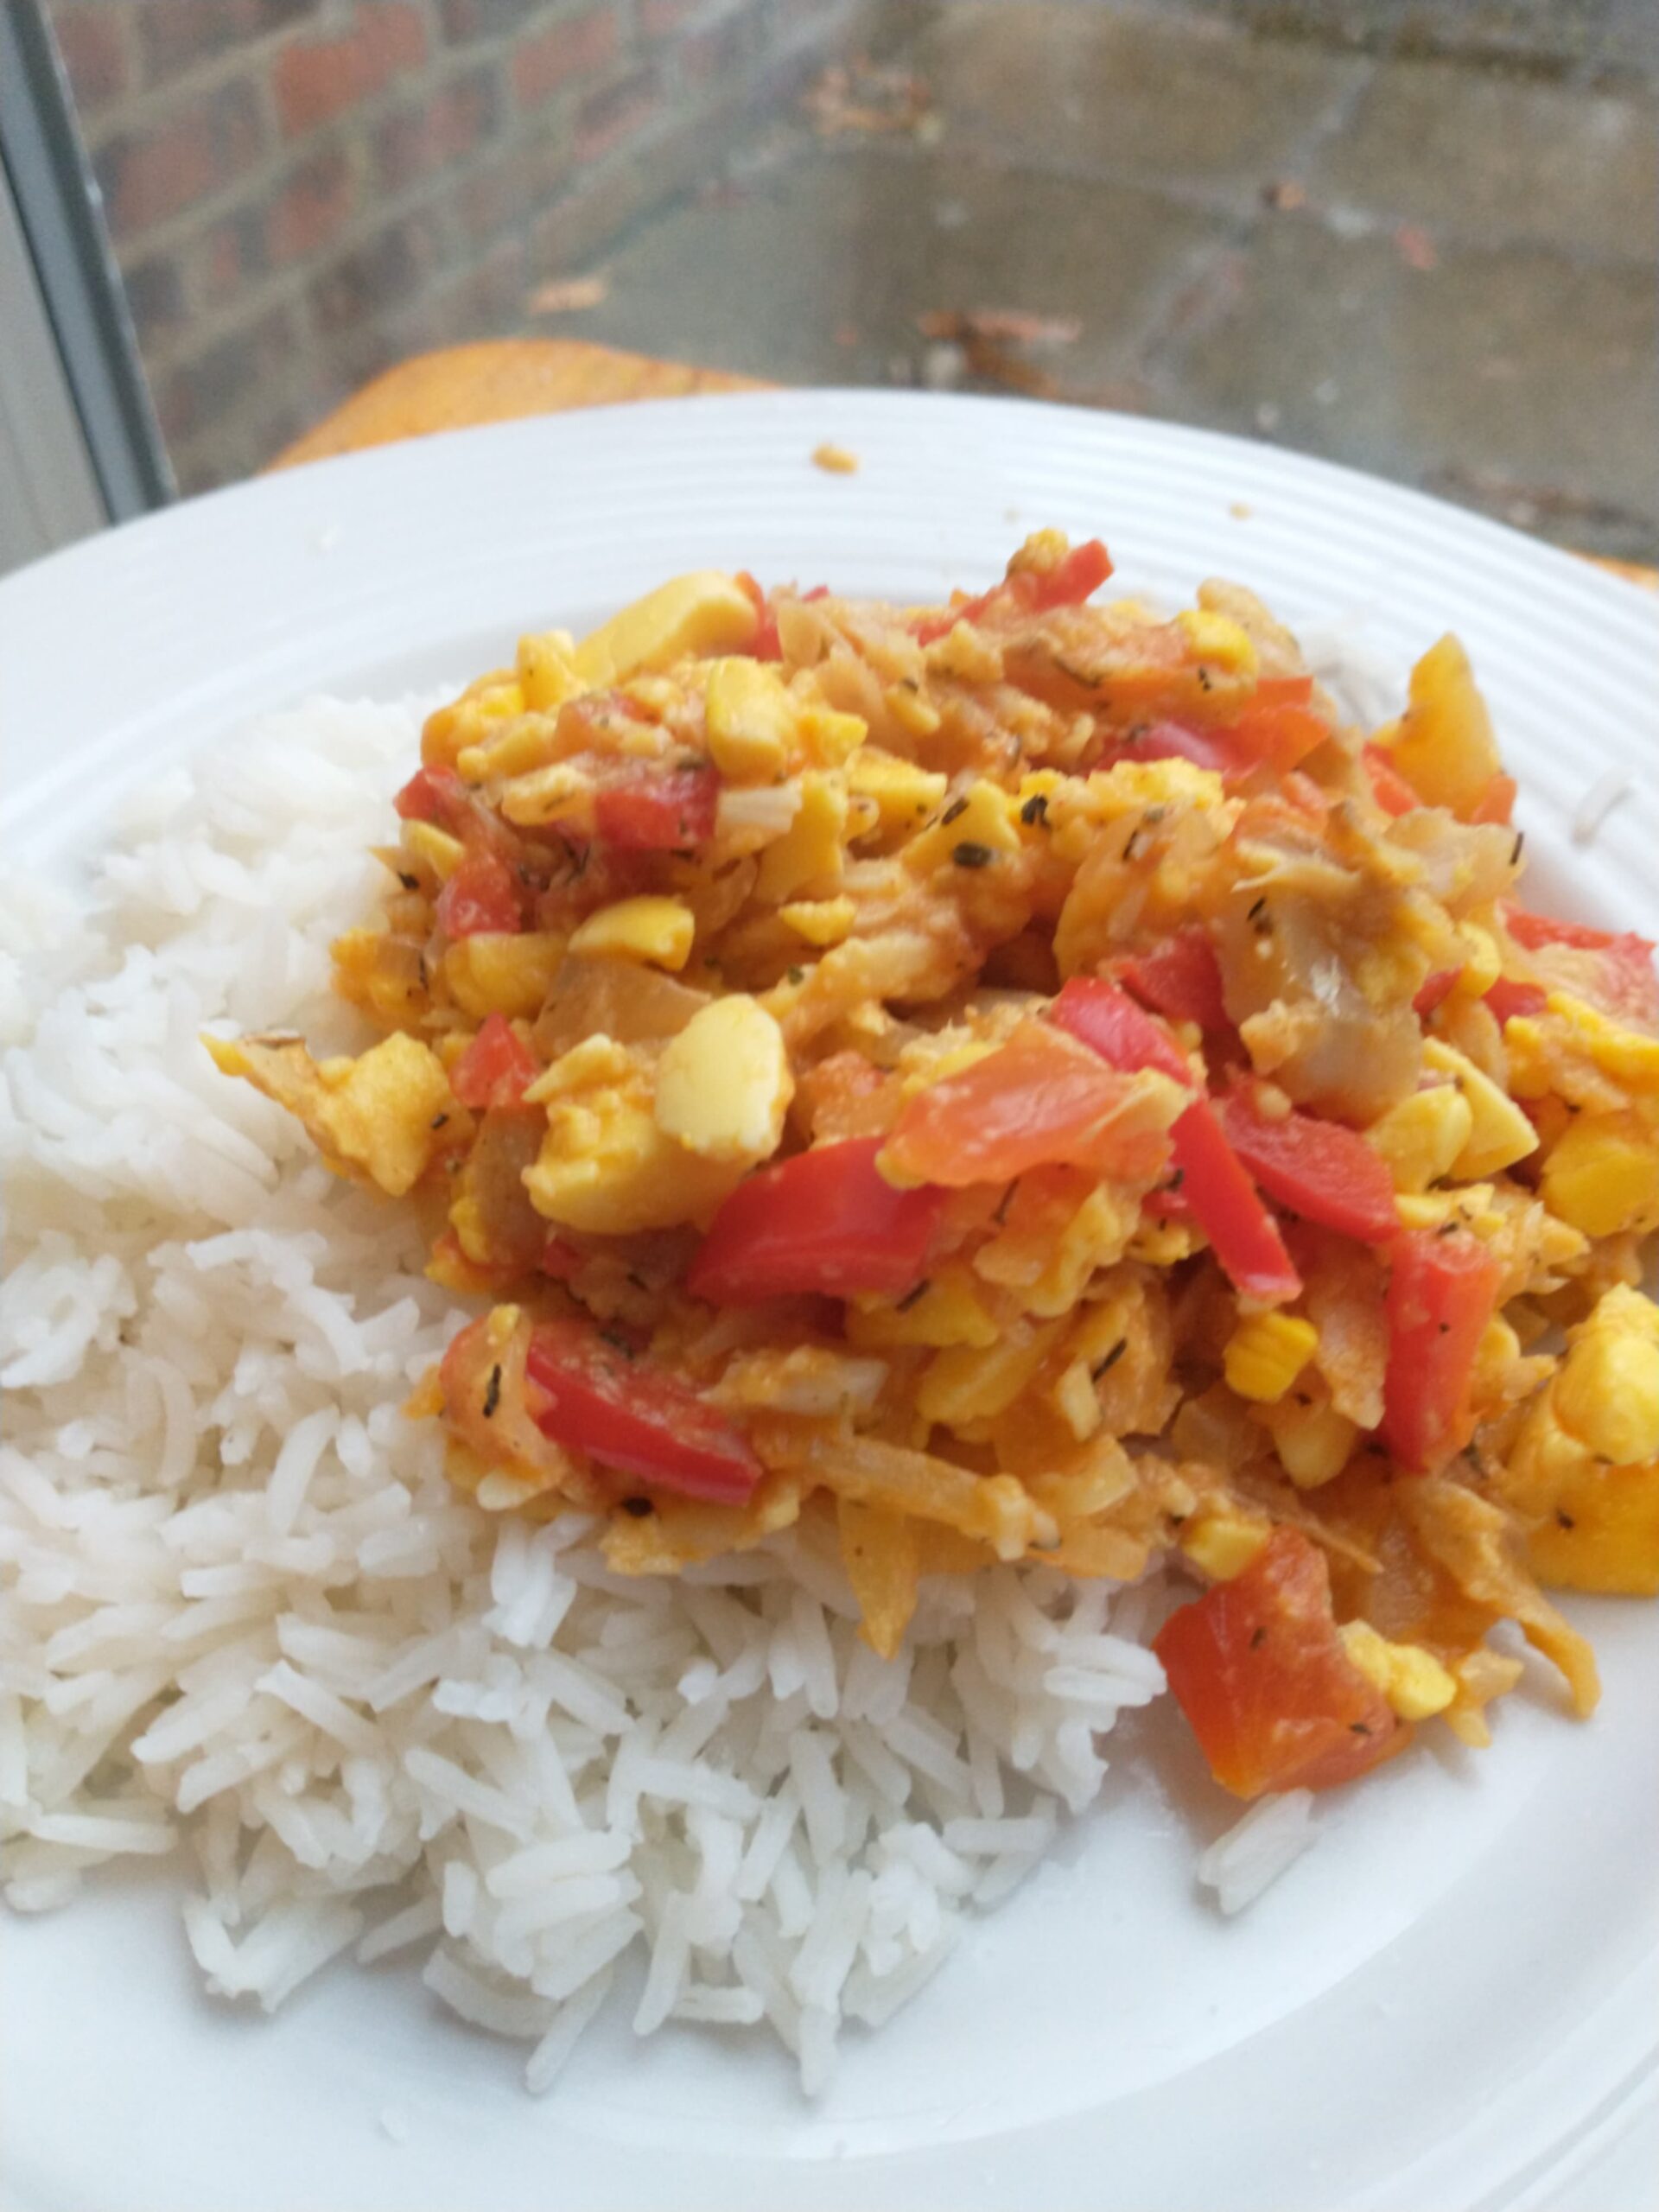 Diving into Jamaica’s national dish: Ackee and saltfish - The Mancunion